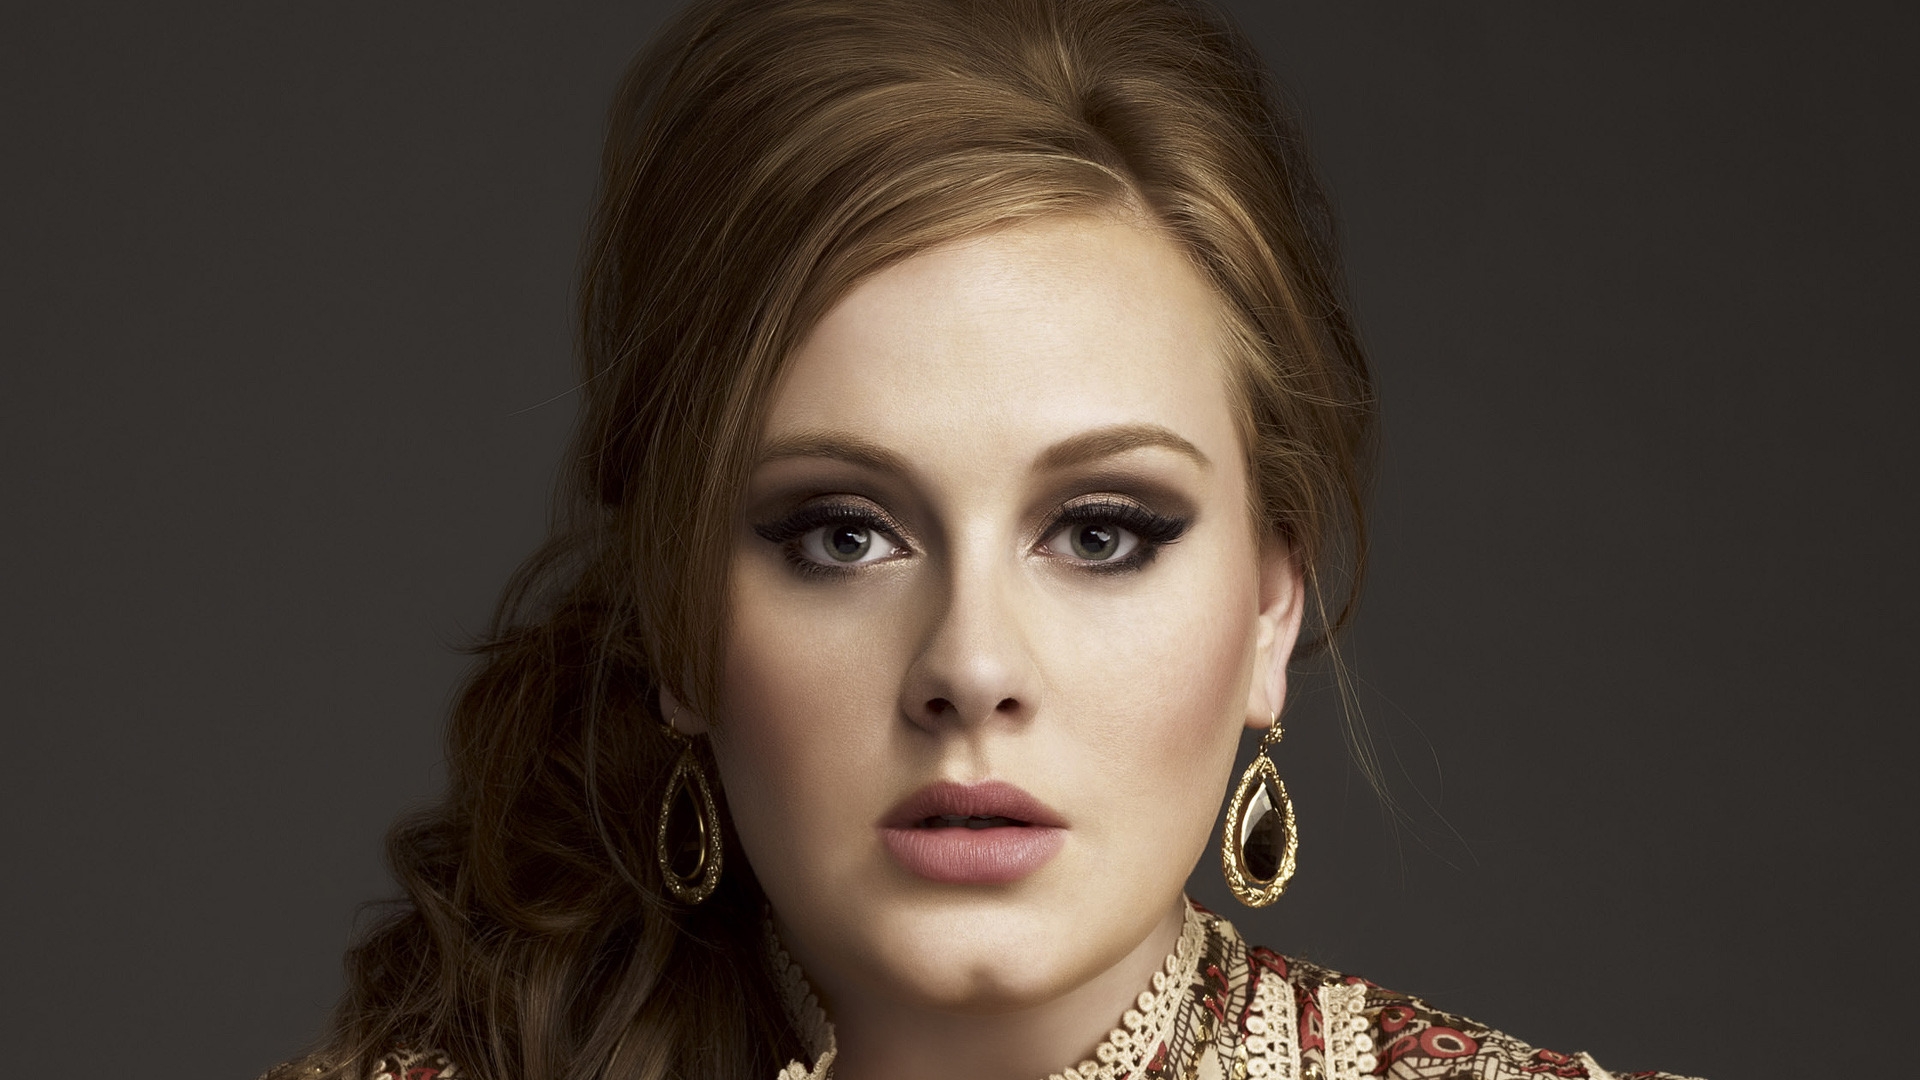 Adele Laurie Blue Adkins for 1920 x 1080 HDTV 1080p resolution